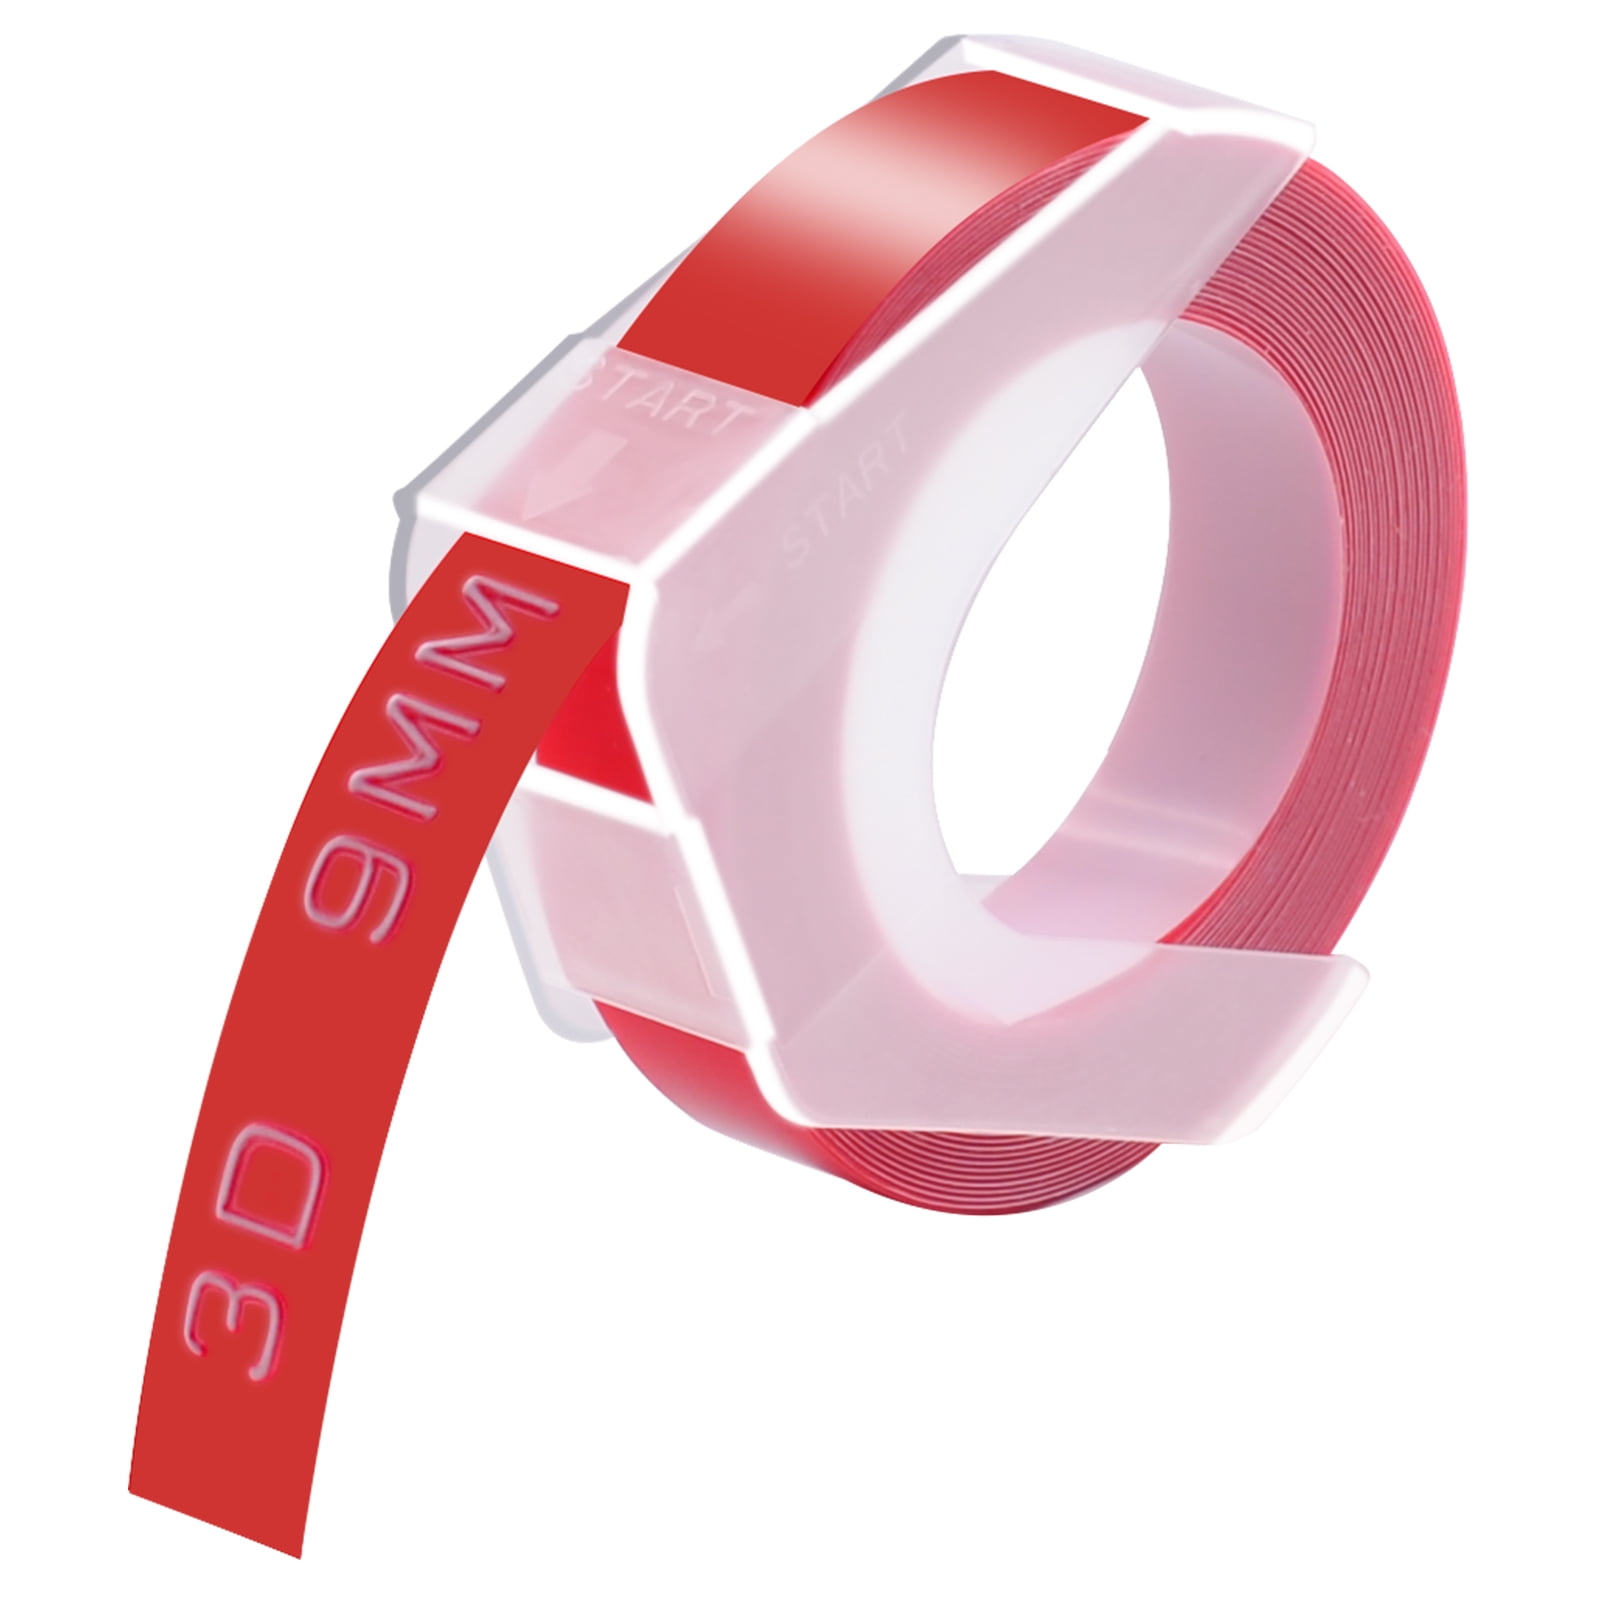 5 Rolls Red Label Tape for Dymo Embossing Label Maker Organizer Xpress Pro 3/8'' 